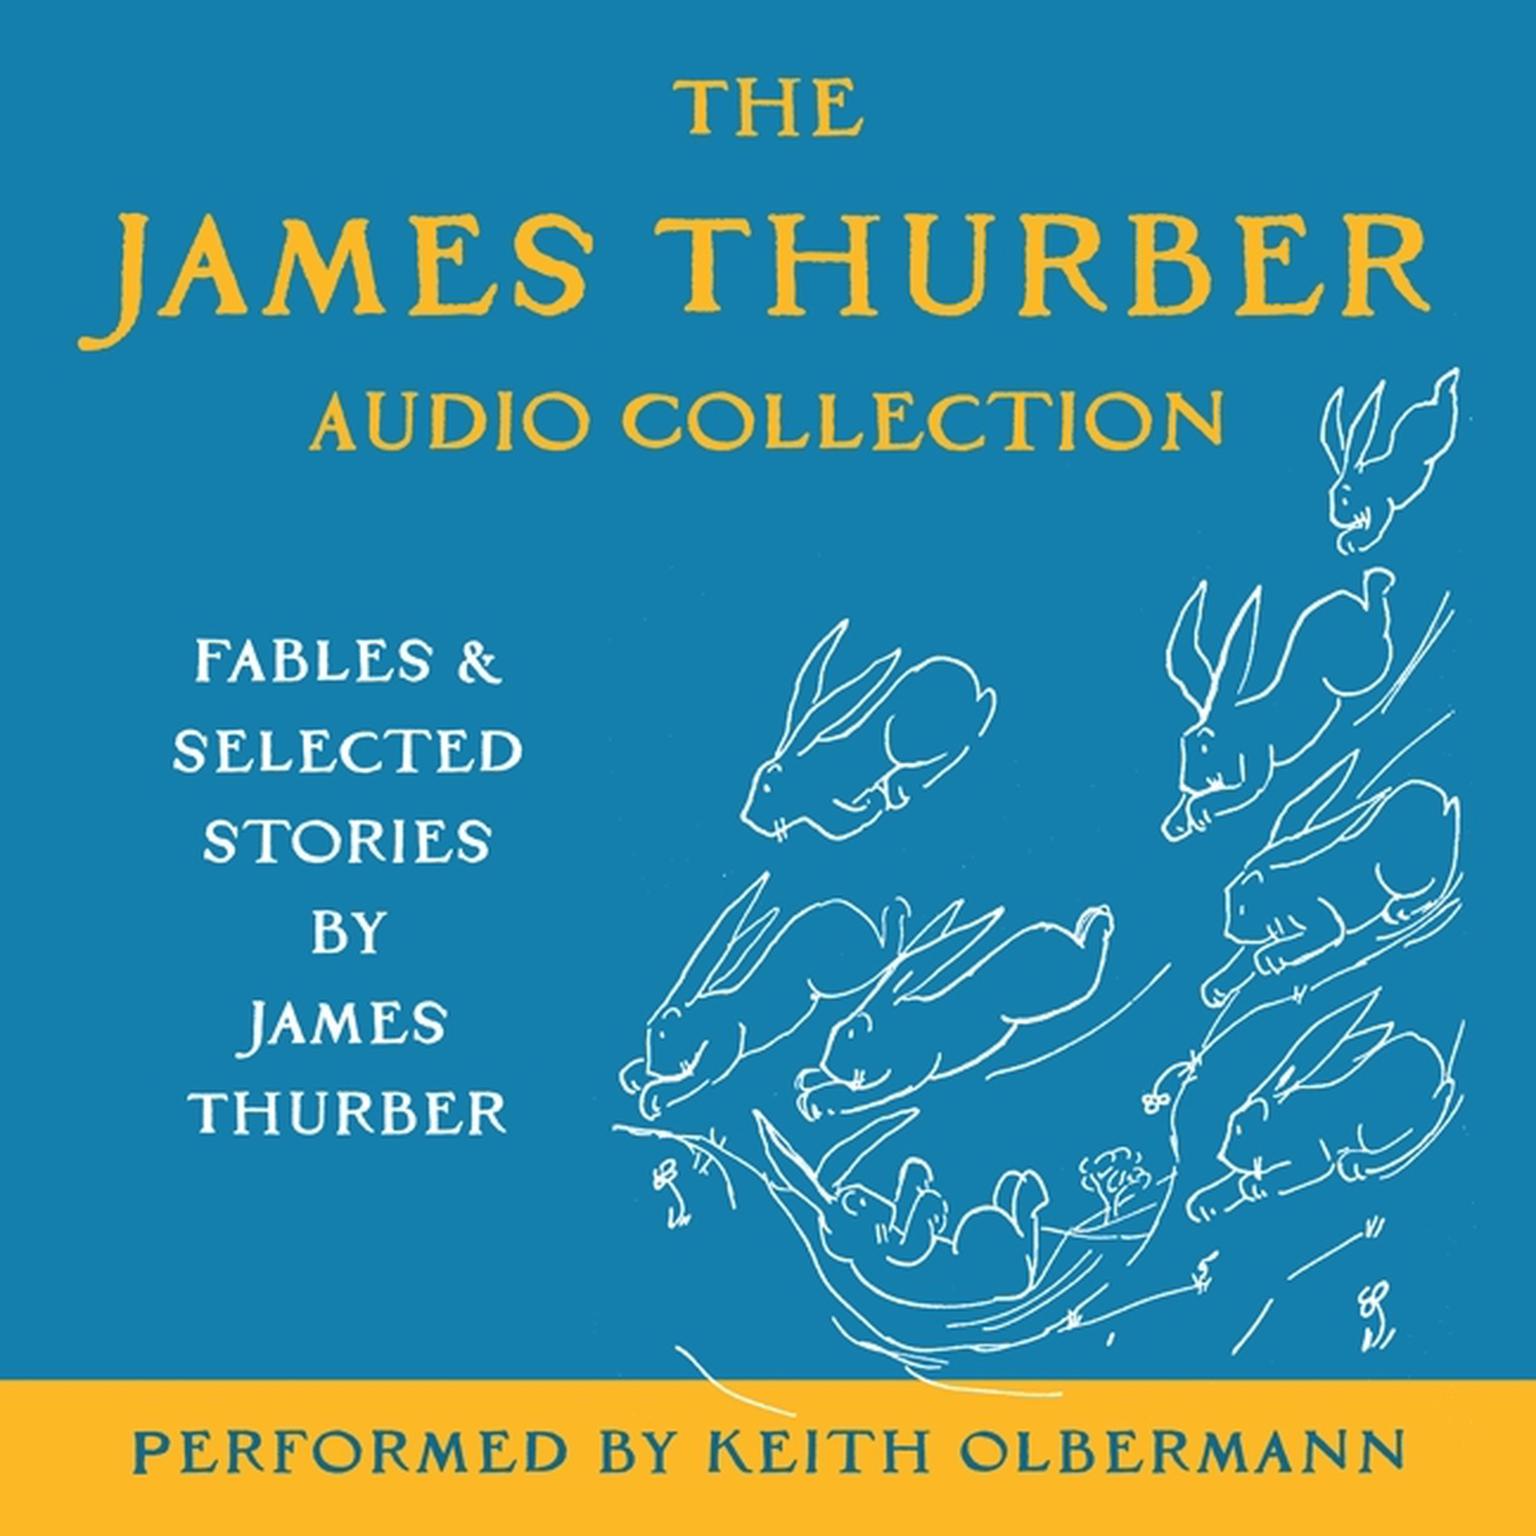 The James Thurber Audio Collection: Fables and Selected Stories by James Thurber Audiobook, by James Thurber